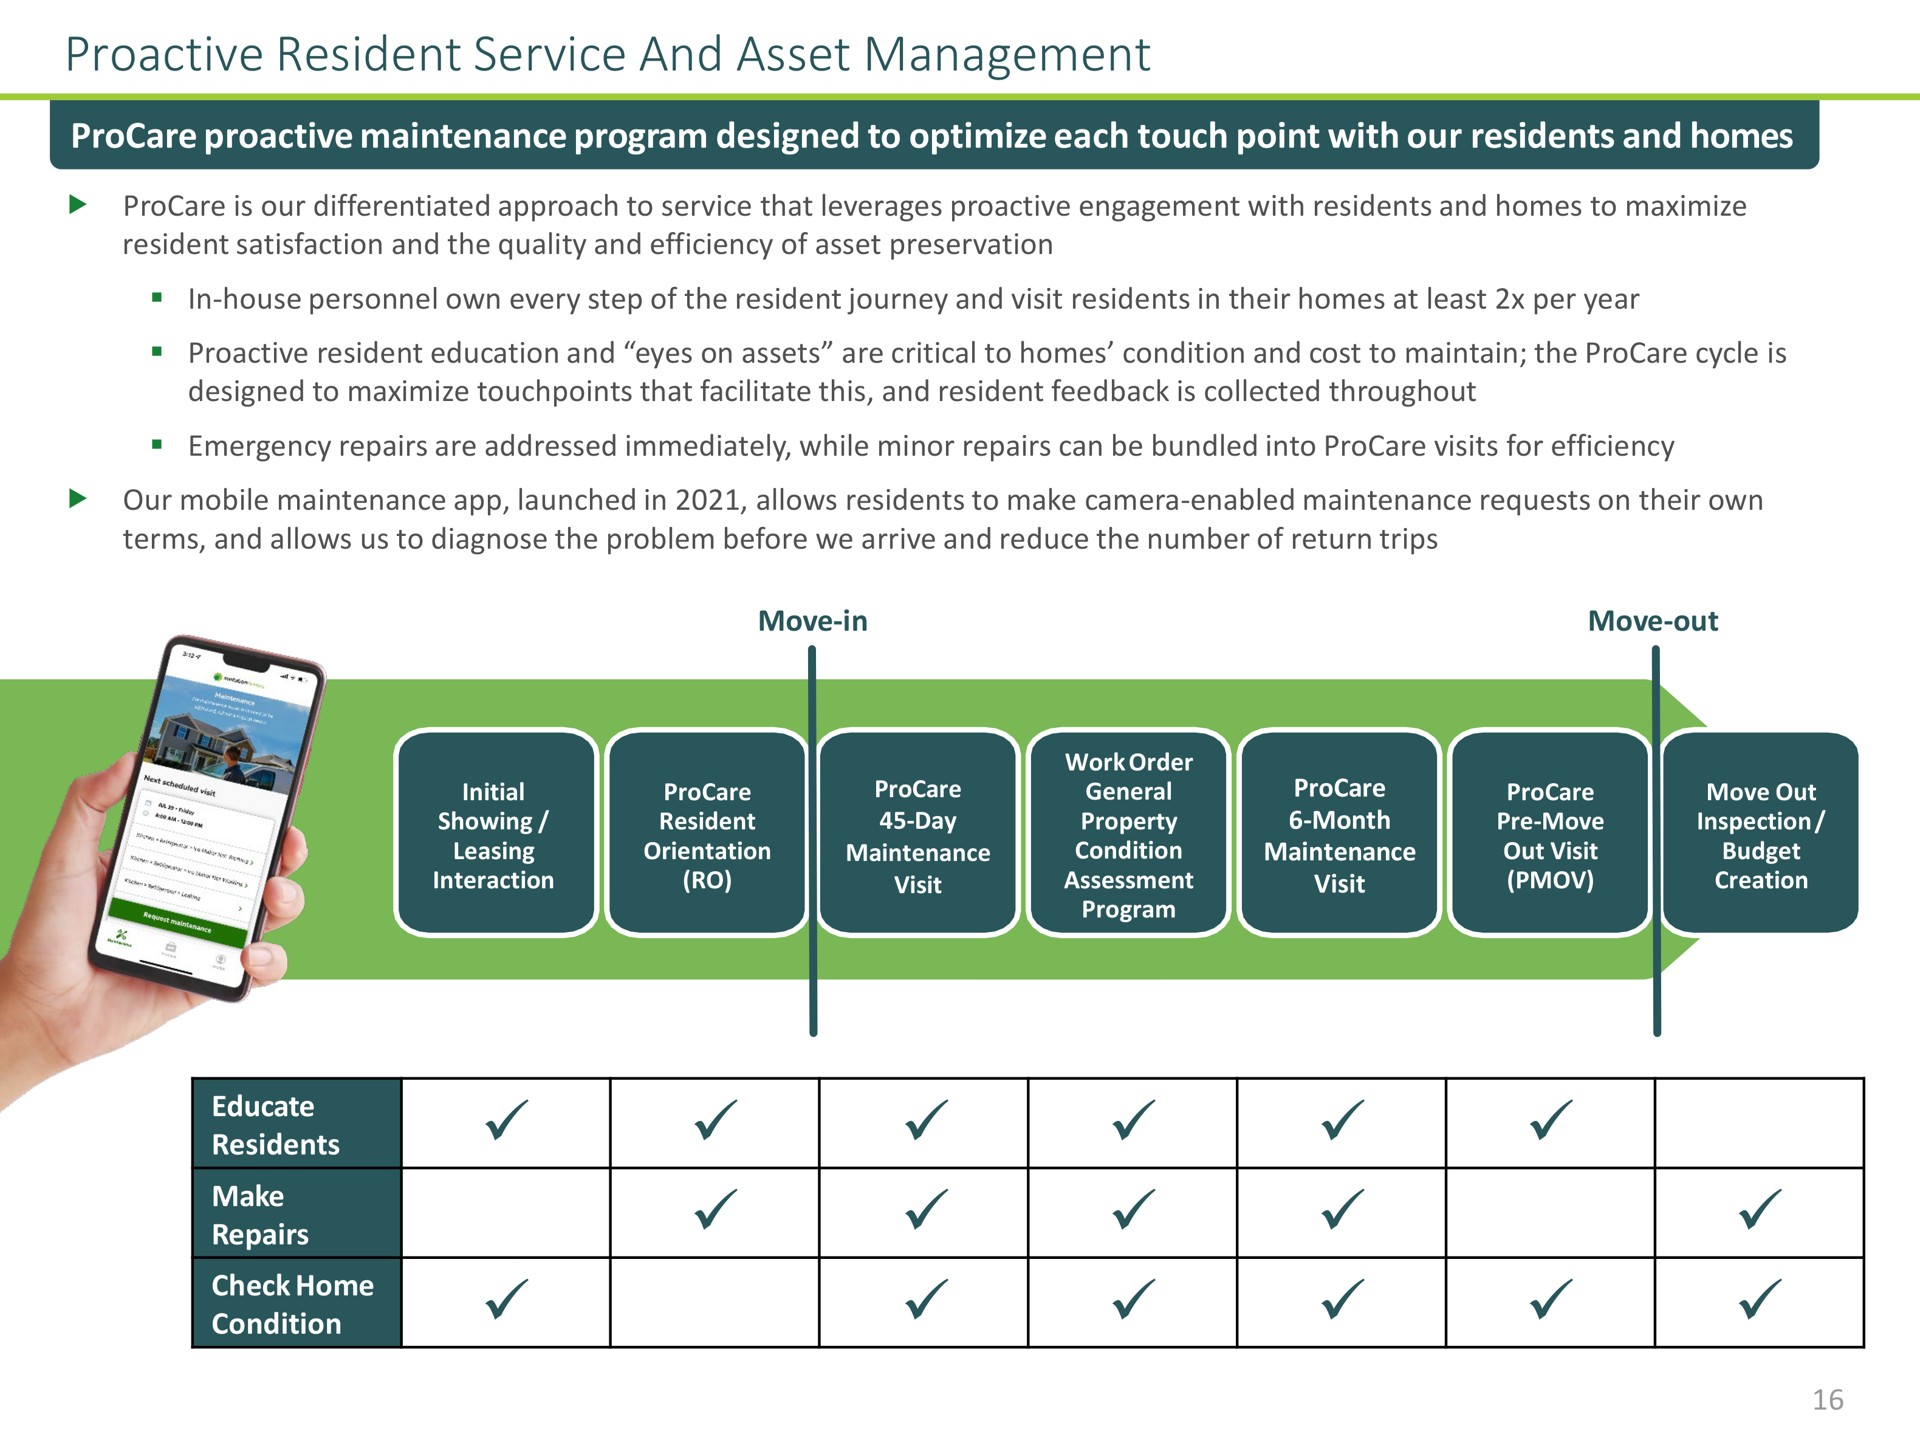 resident service and asset management maintenance program designed to optimize each touch point with our residents and homes | Invitation Homes